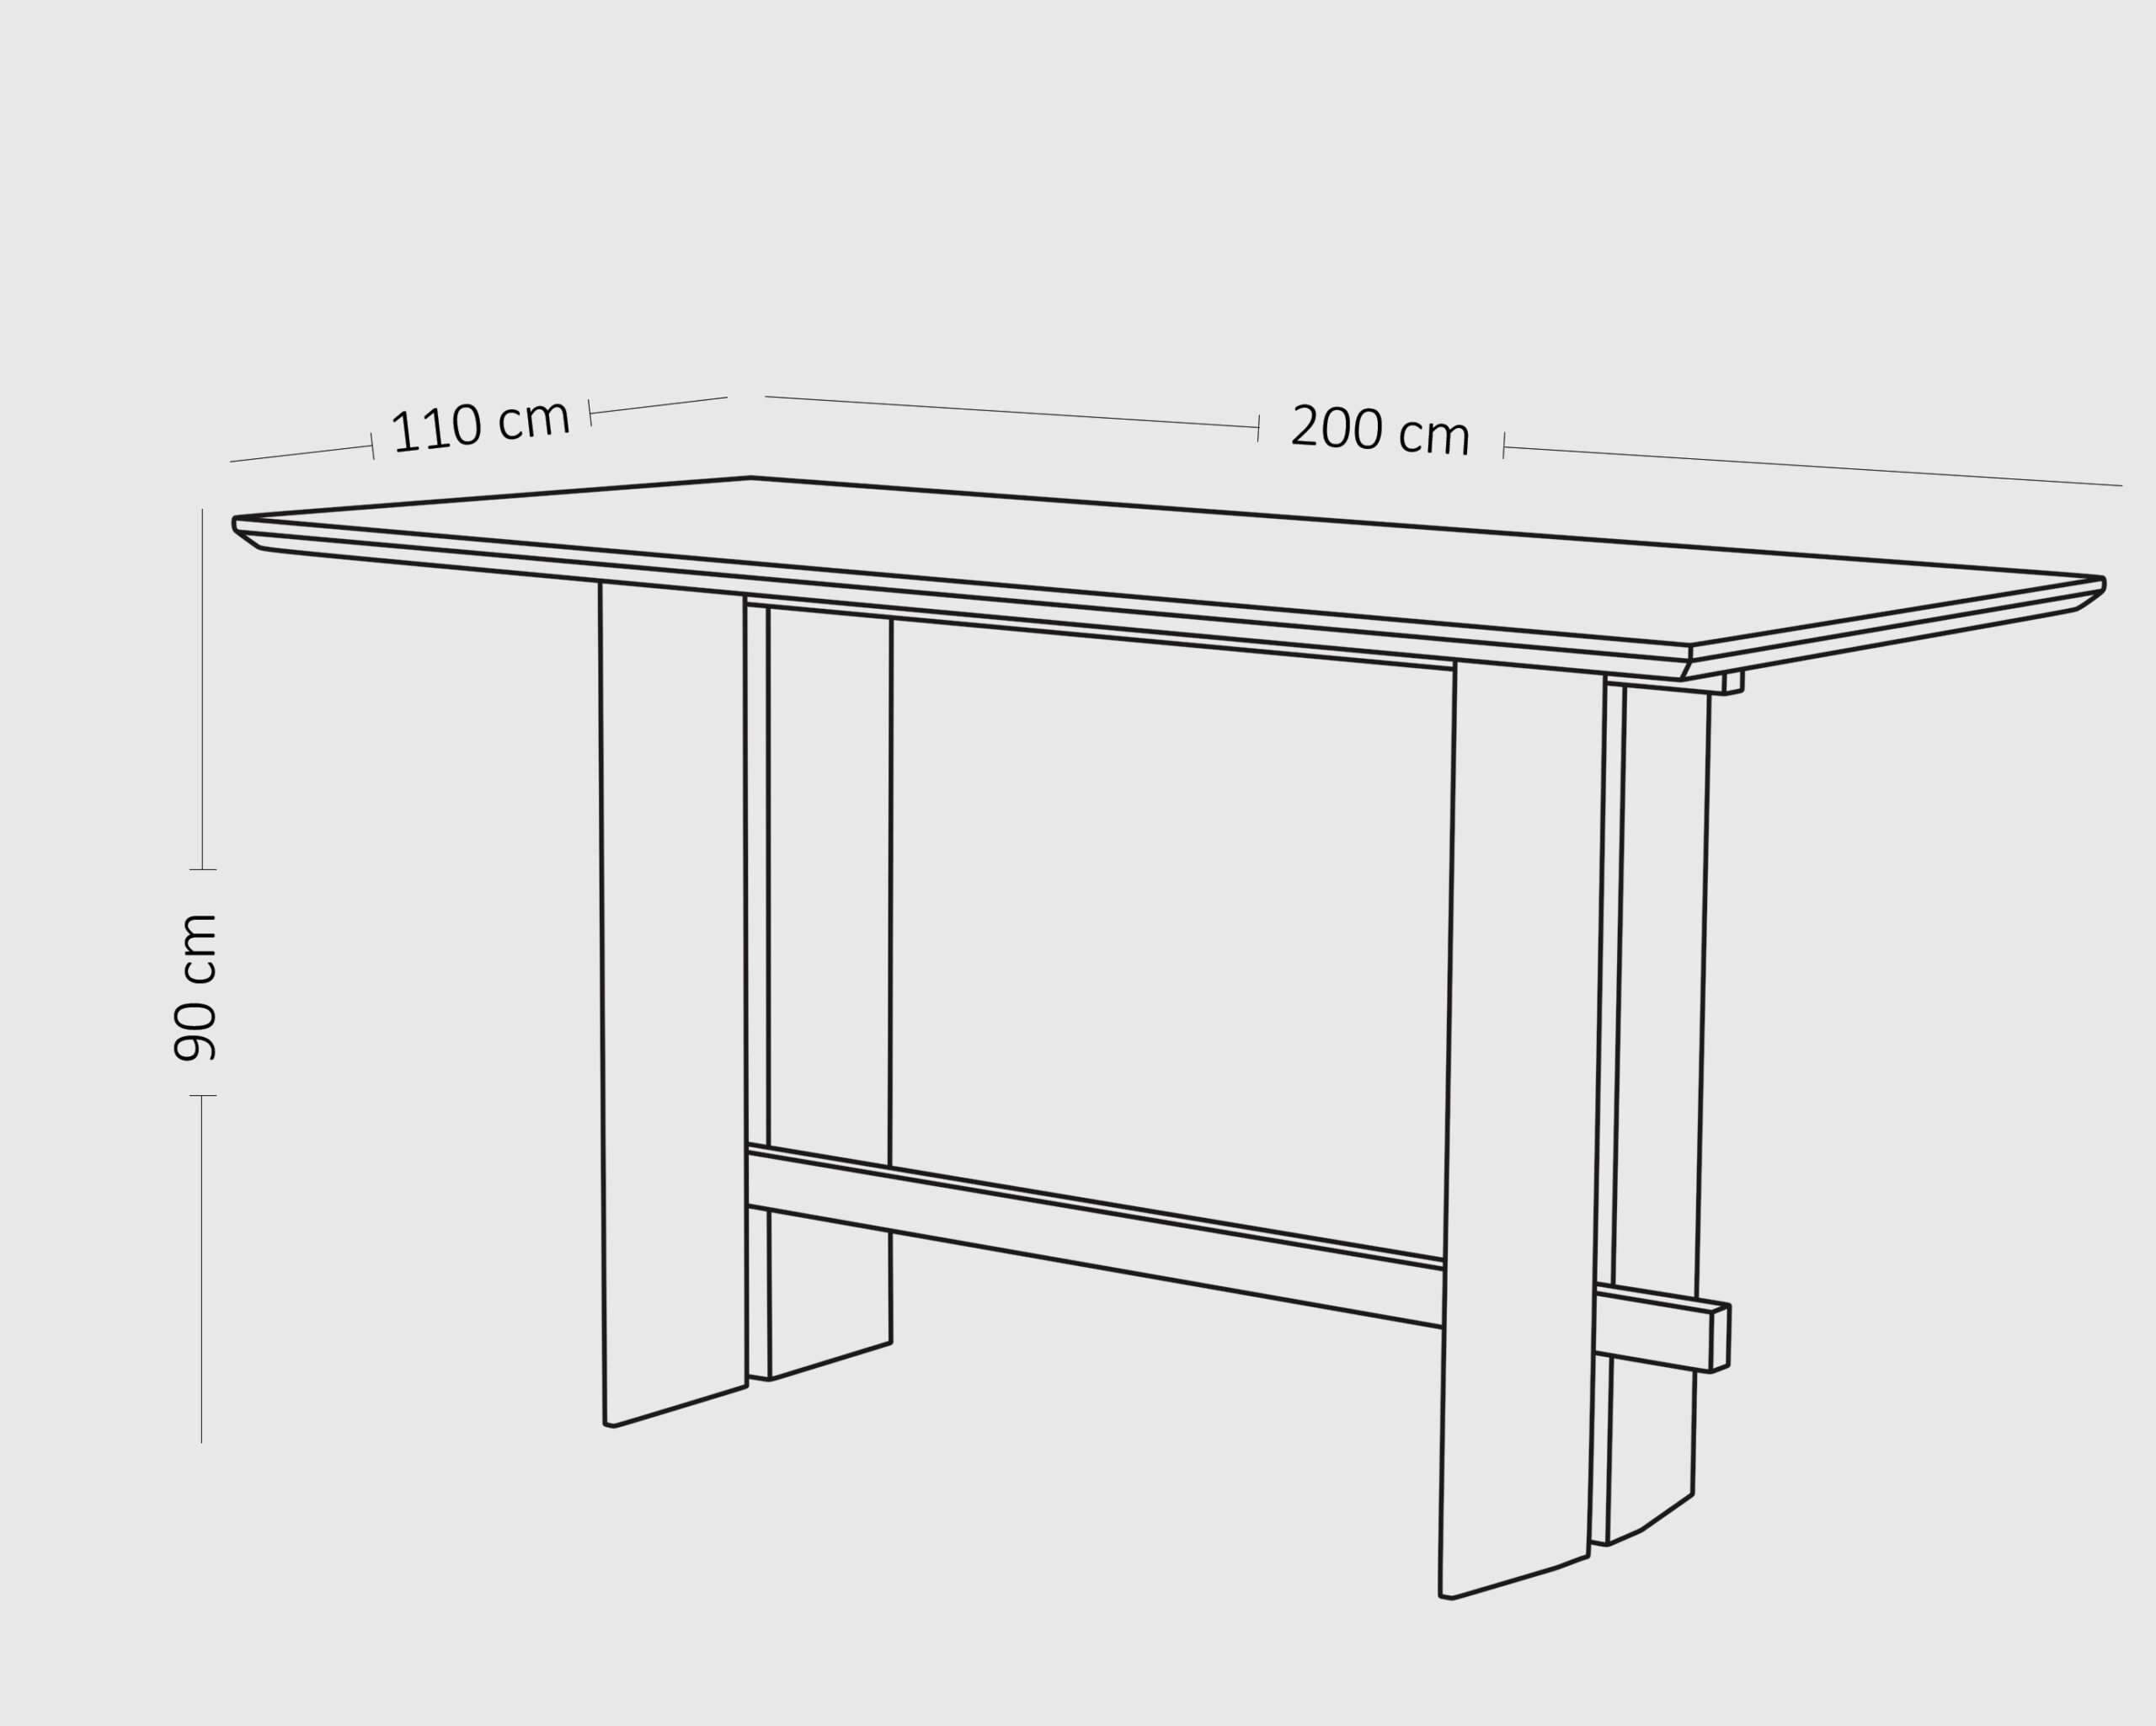 drawings of alto bar table dimensions.